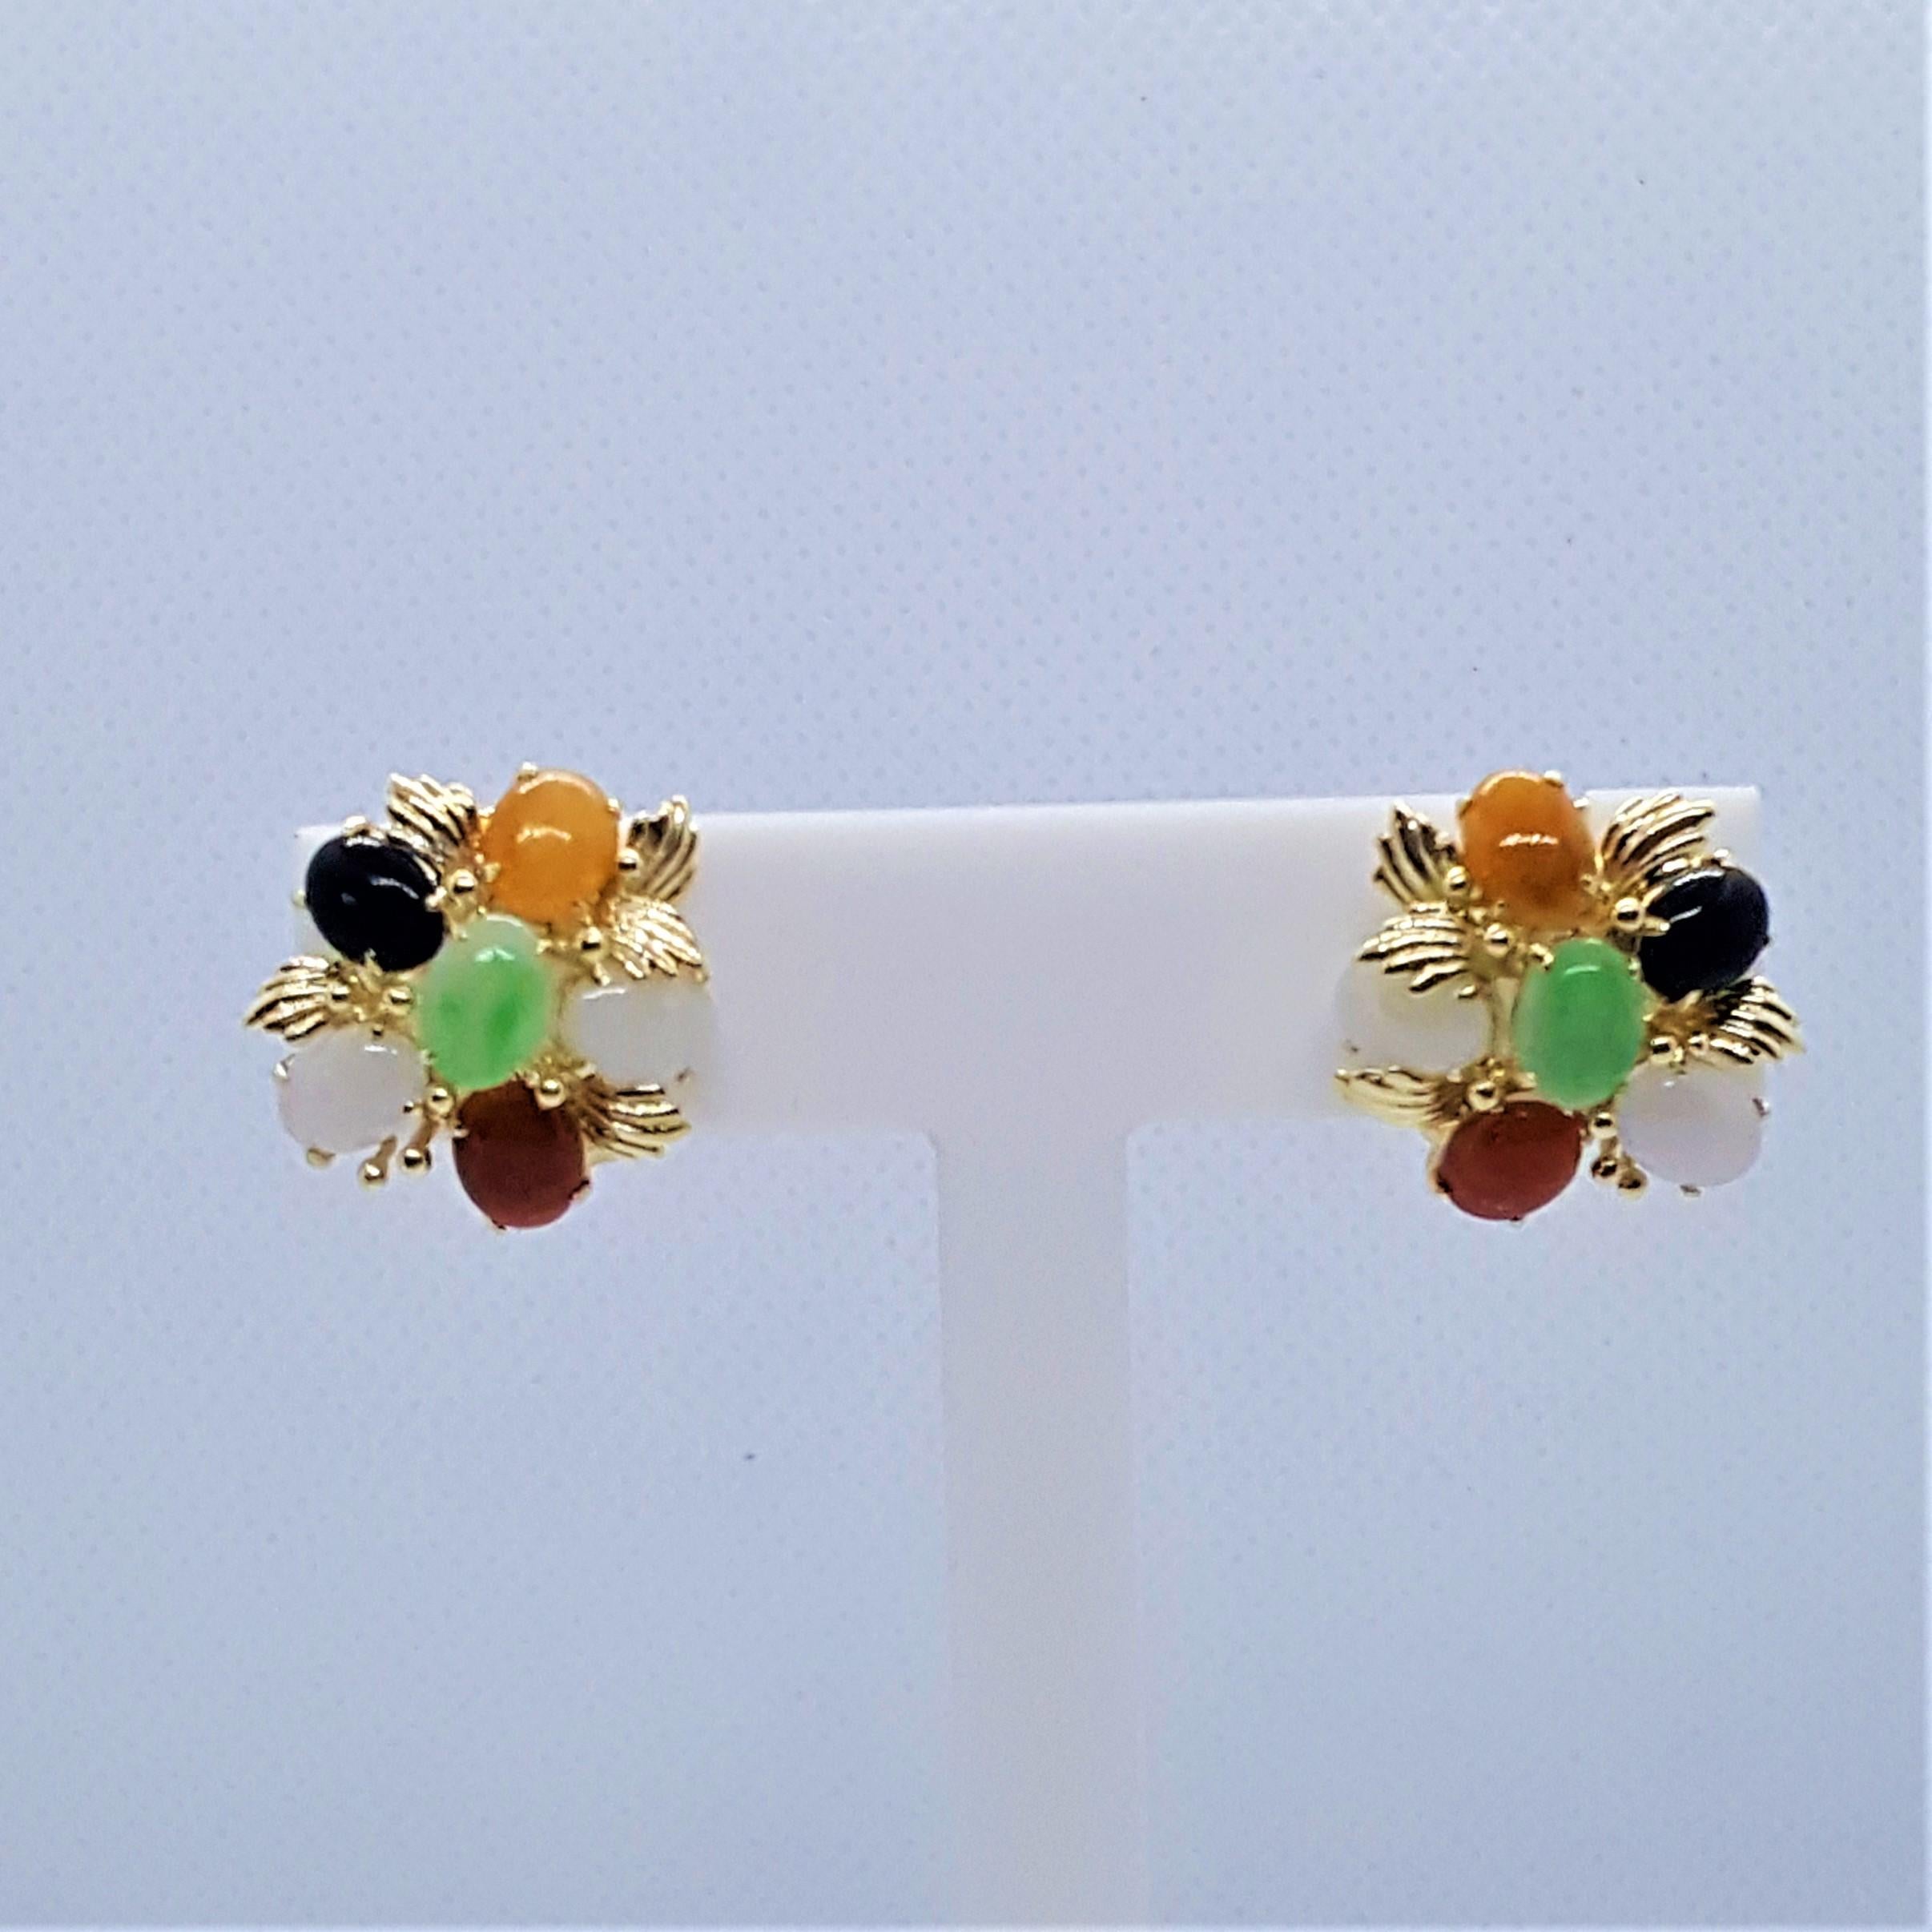 Oval Cut 14kt Yellow Gold Multi-Colored Jade Earrings Friction Posts with Omega Backings